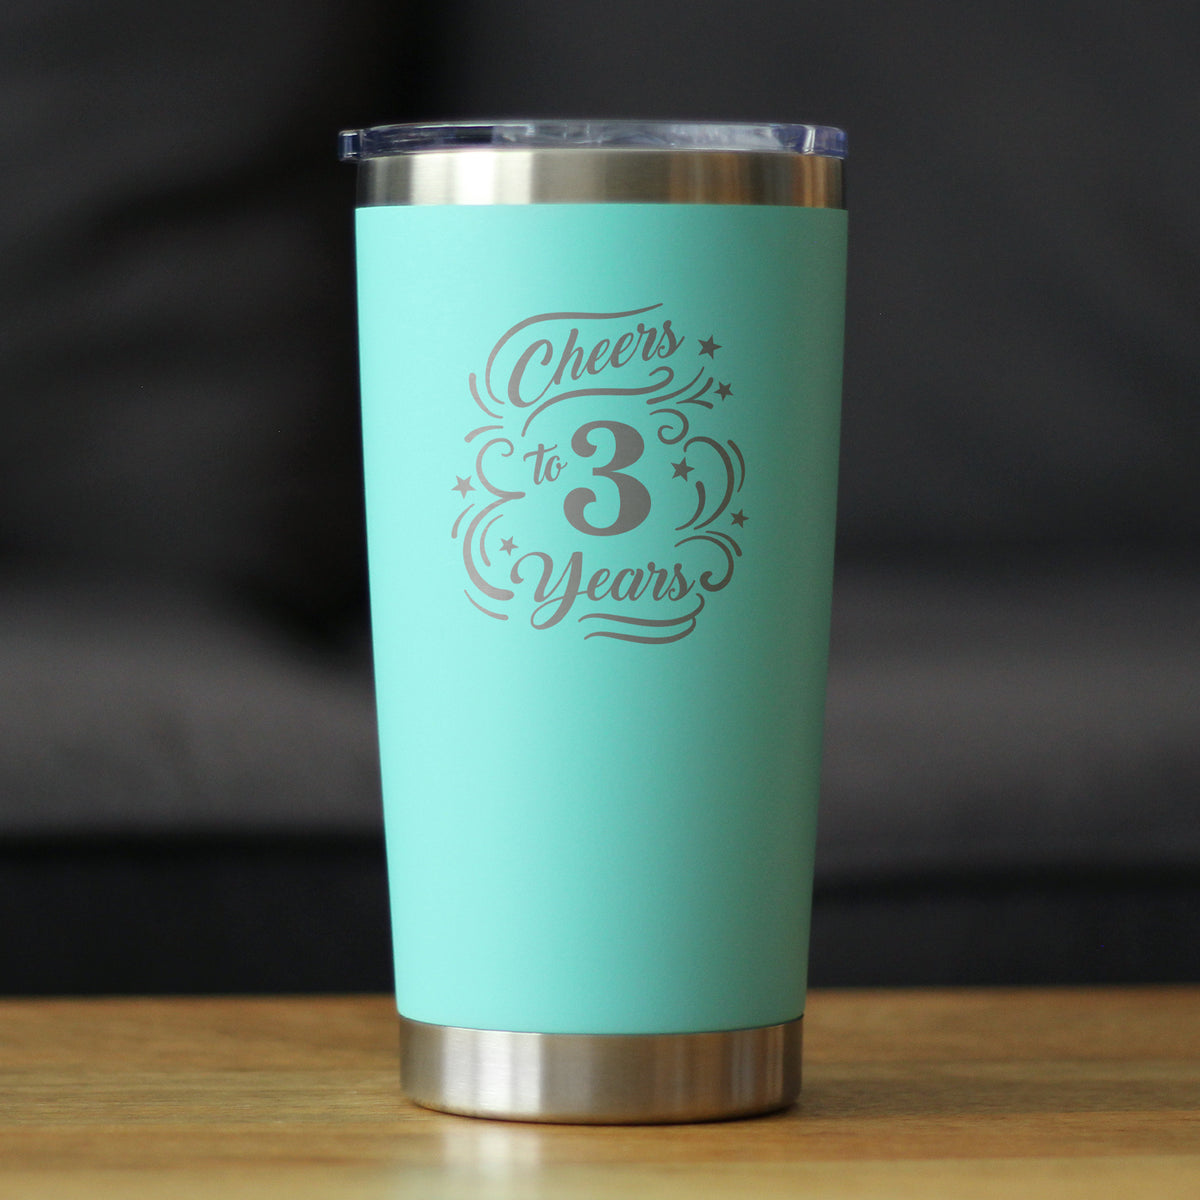 Cheers to 3 Years - Insulated Coffee Tumbler Cup with Sliding Lid - Stainless Steel Insulated Mug - 3rd Anniversary Gifts and Party Decor